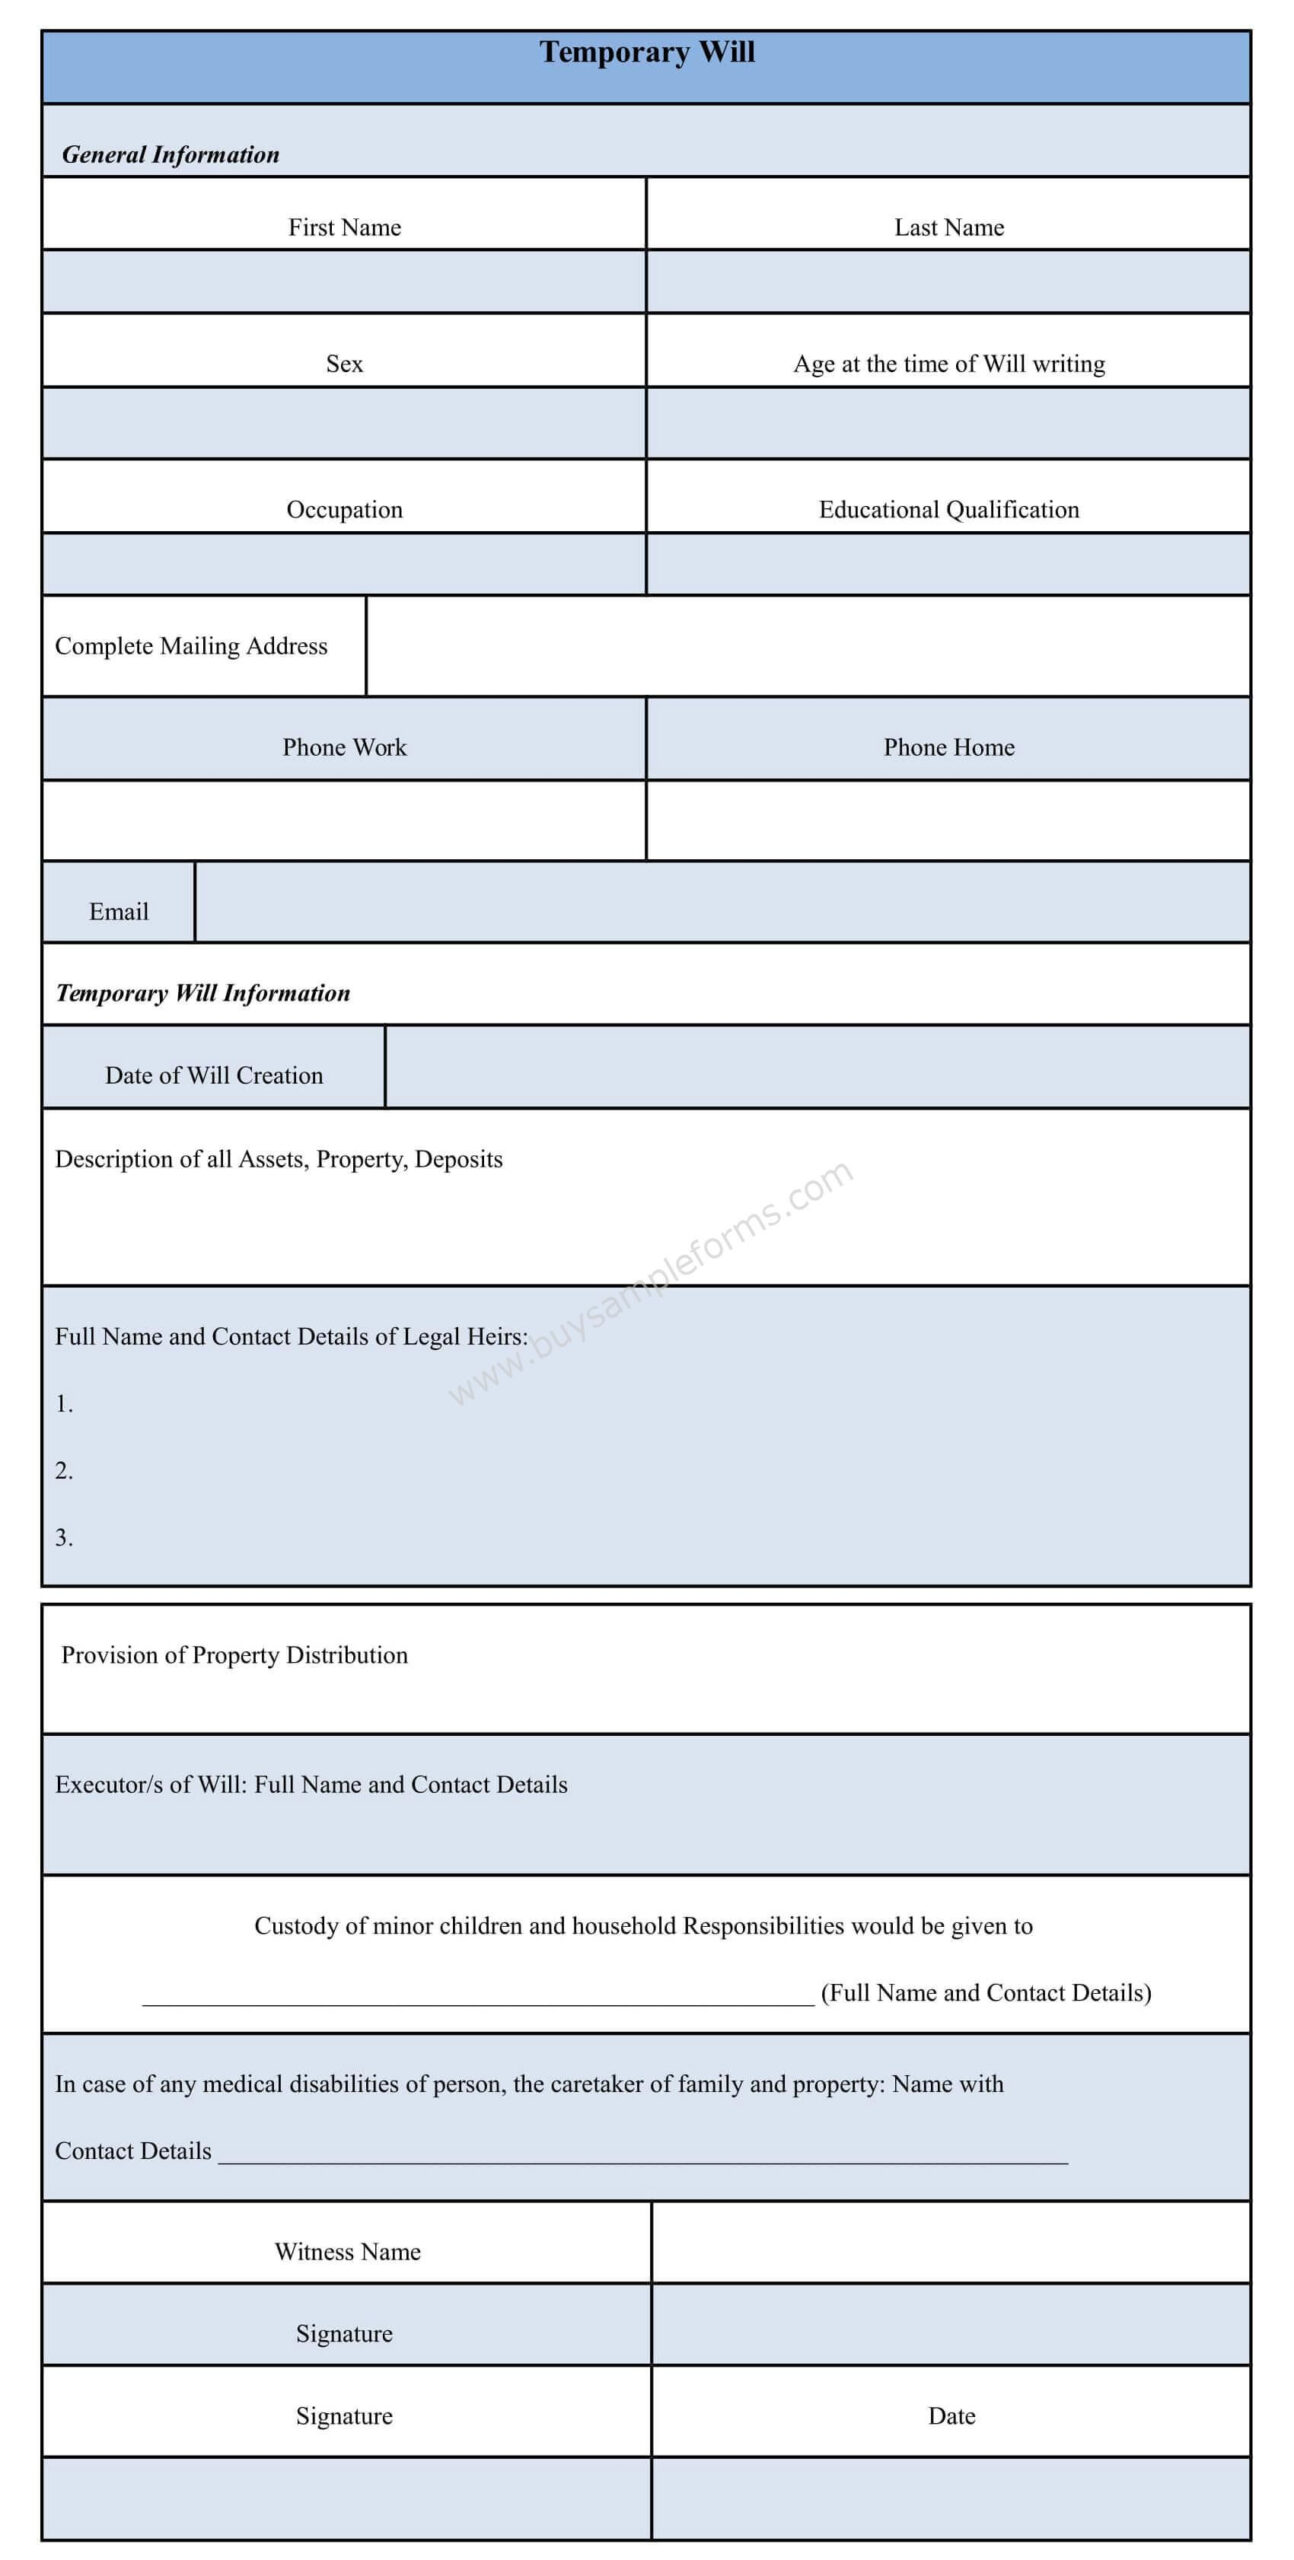 Temporary Will Form Sample Template Buy Sample Forms Online Form